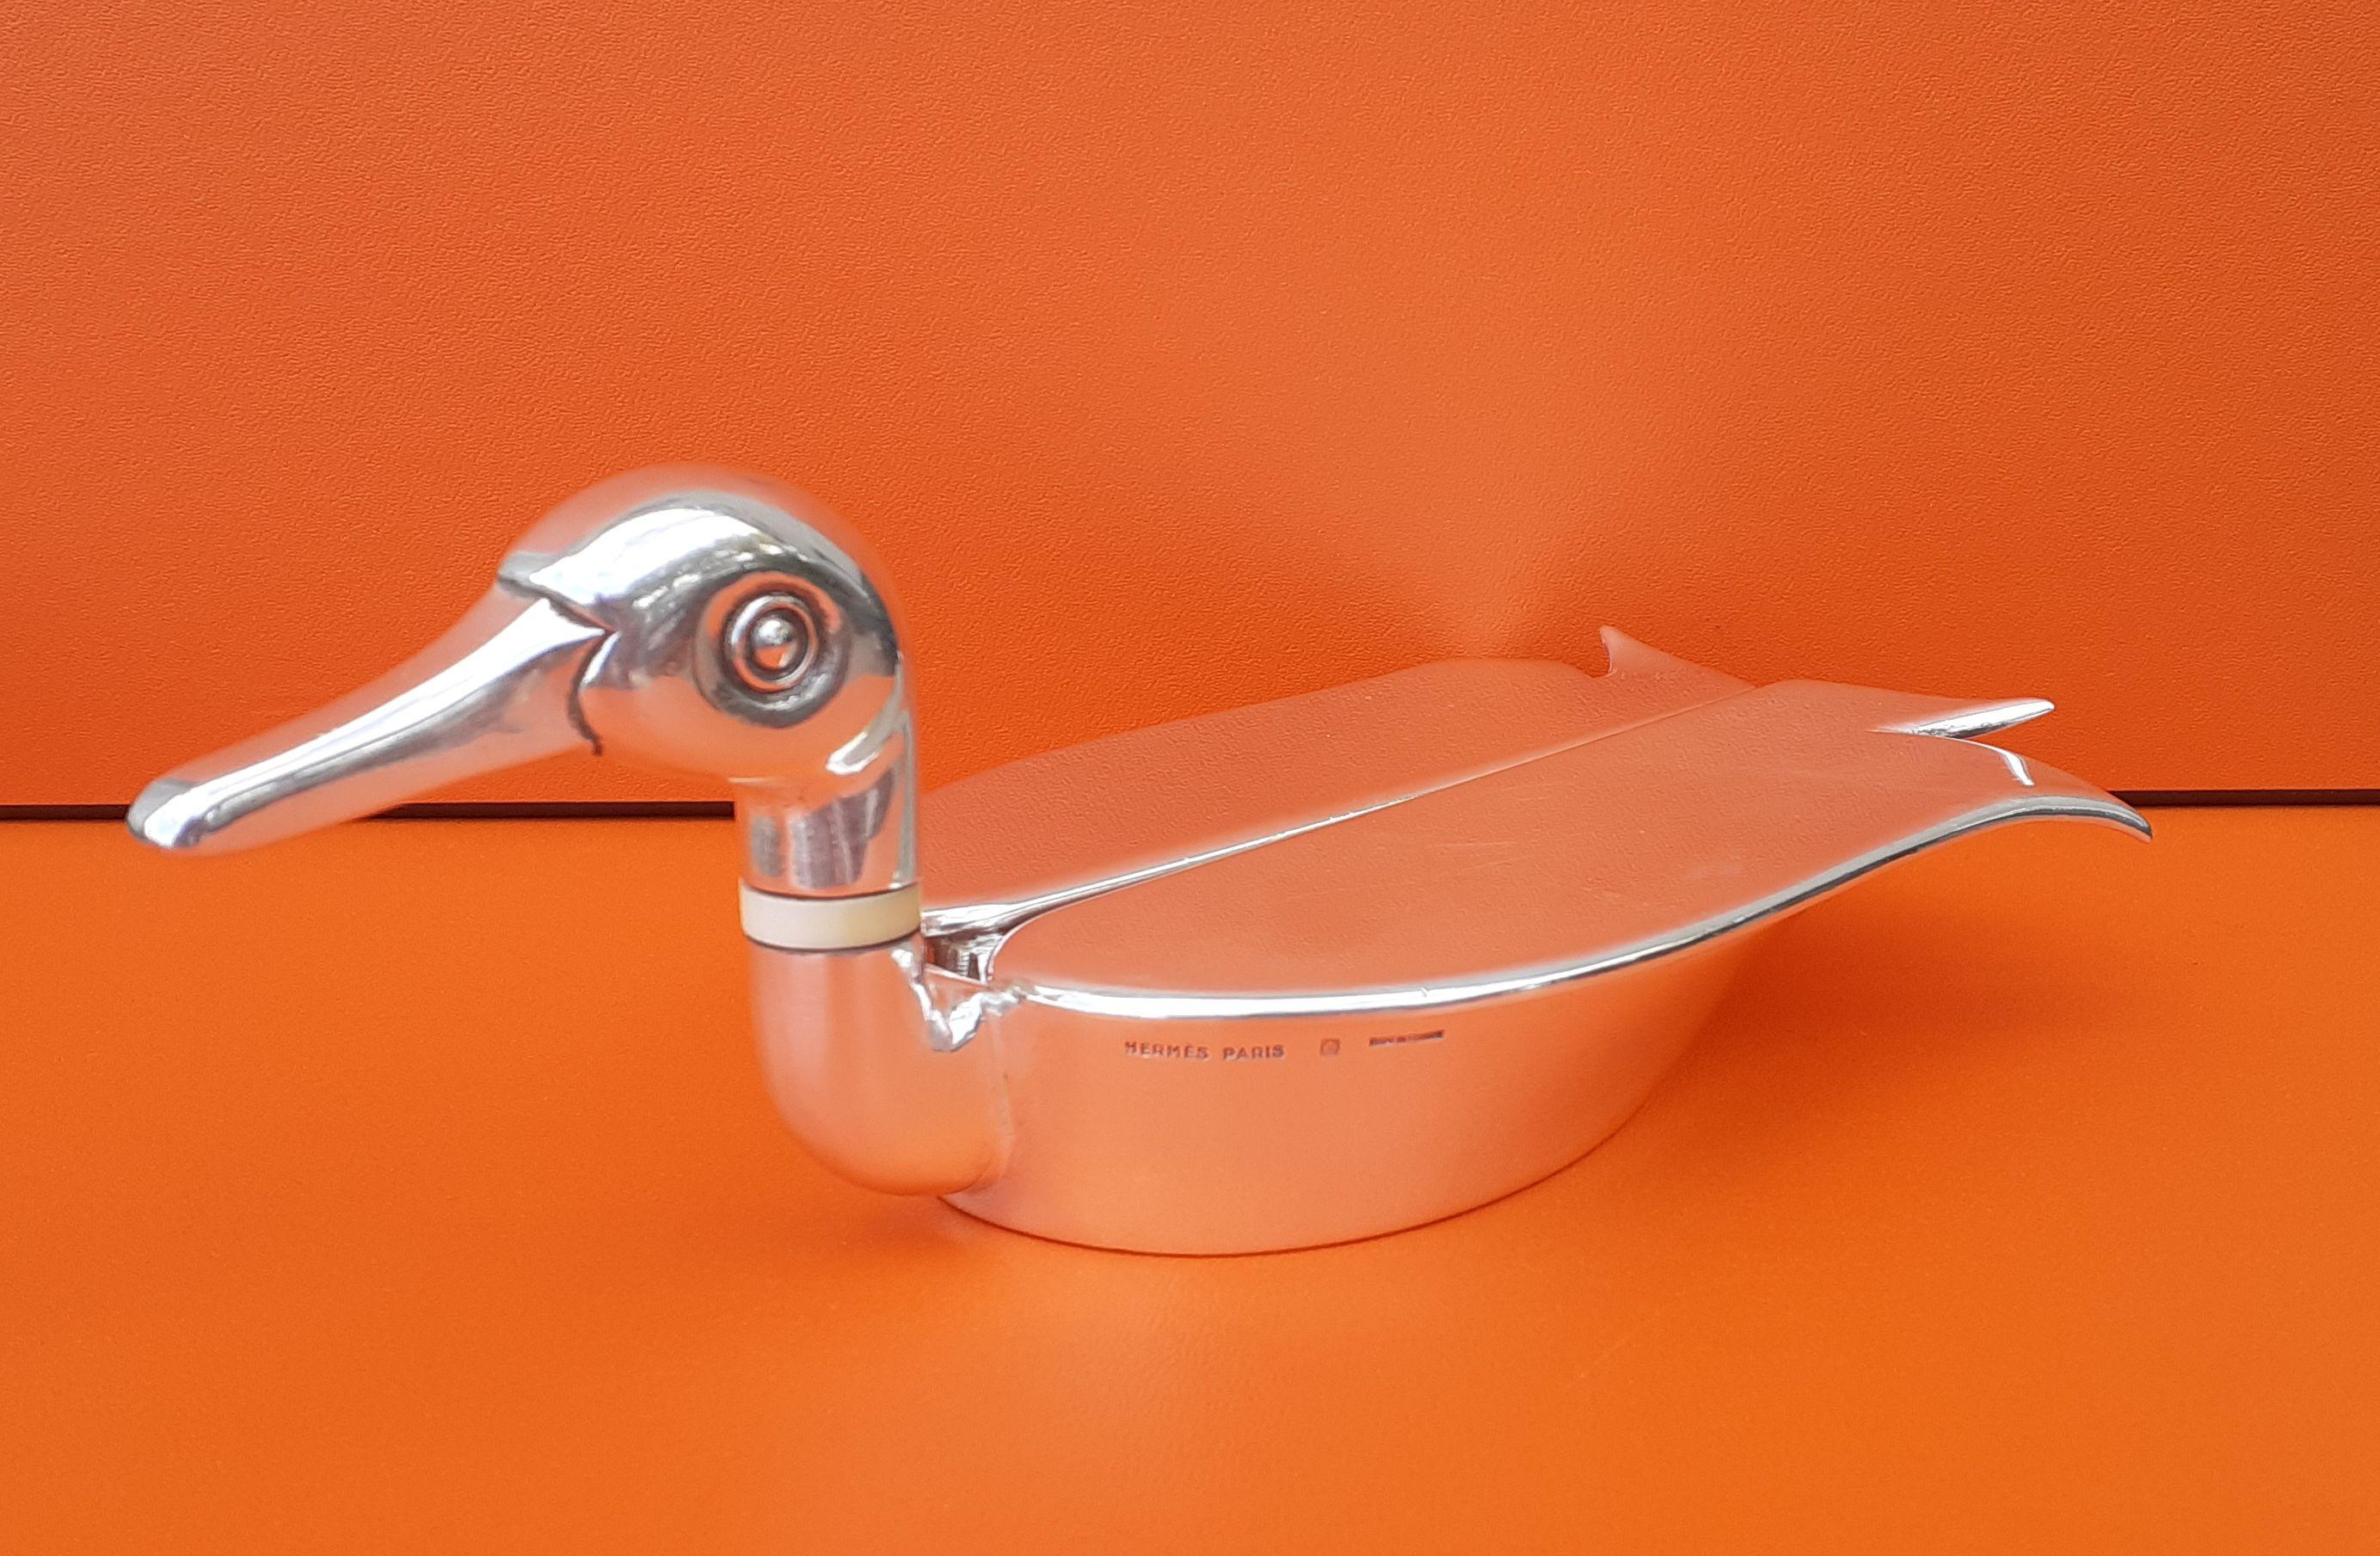 Rare Authentic Hermès Change Tray

In shape of a Duck

Can be used as ashtray

Made in France 

Vintage item

Made of silver-tone metal (non precious)

The 2 wings open and reveal a change tray. Can also be used as an ashtray

